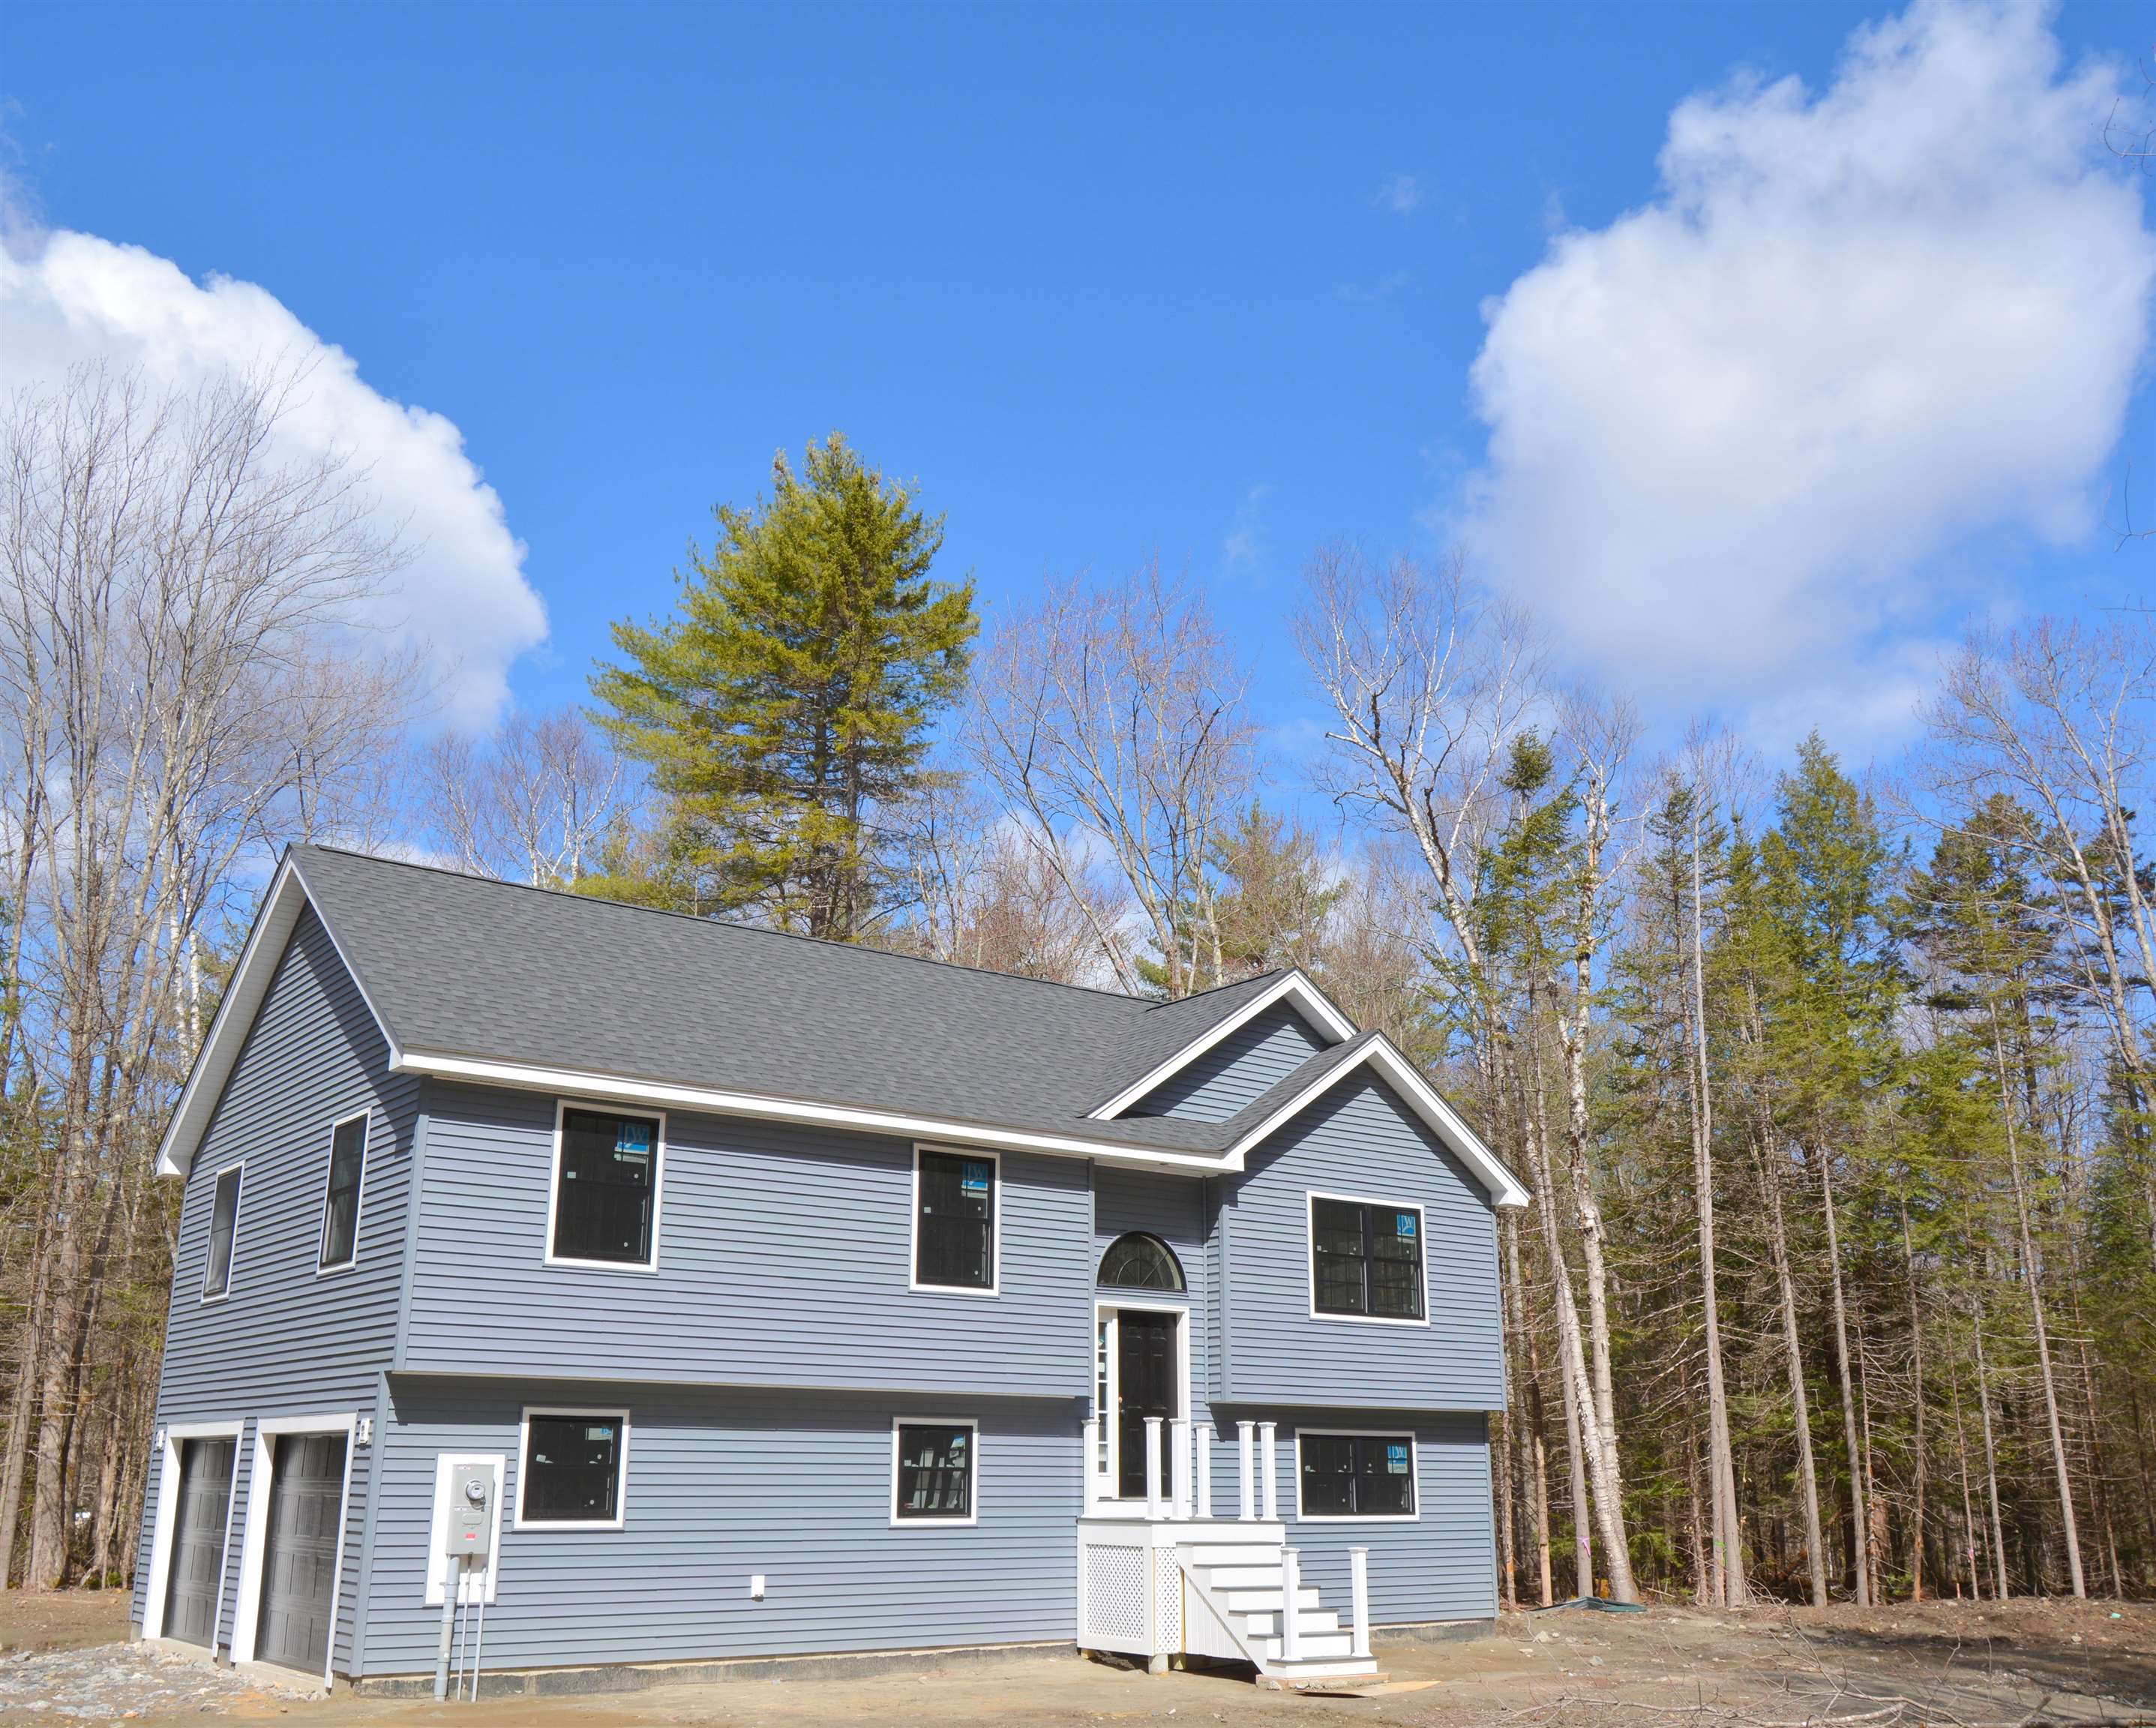 Village of Eastman in Town of Grantham NH Home for sale $549,016 $469 per sq.ft.